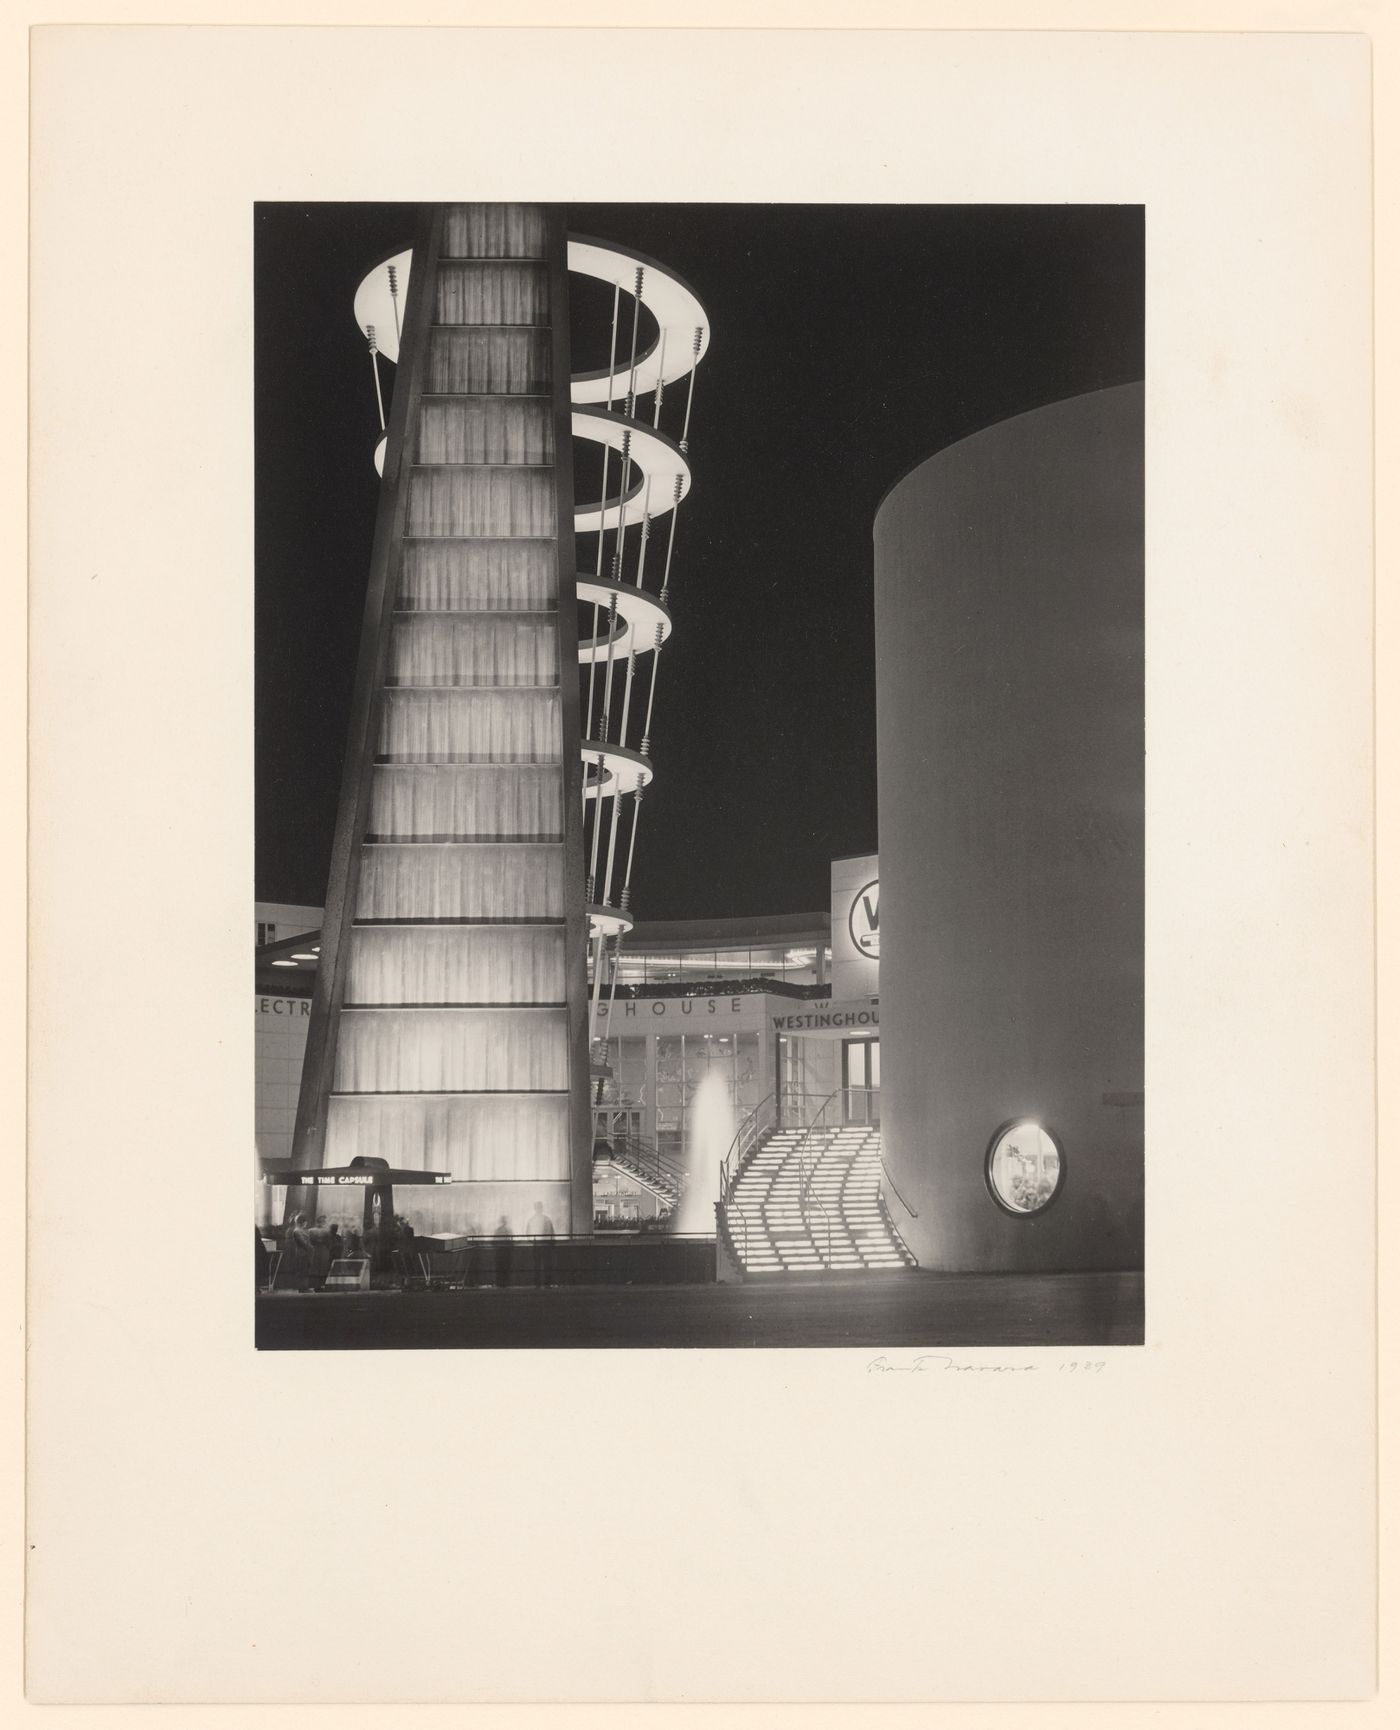 New York World's Fair (1939-1940): Night view of Time Capsule and the Singing Tower of Light in front of the Westinghouse Electric and Manufacturing Company Building